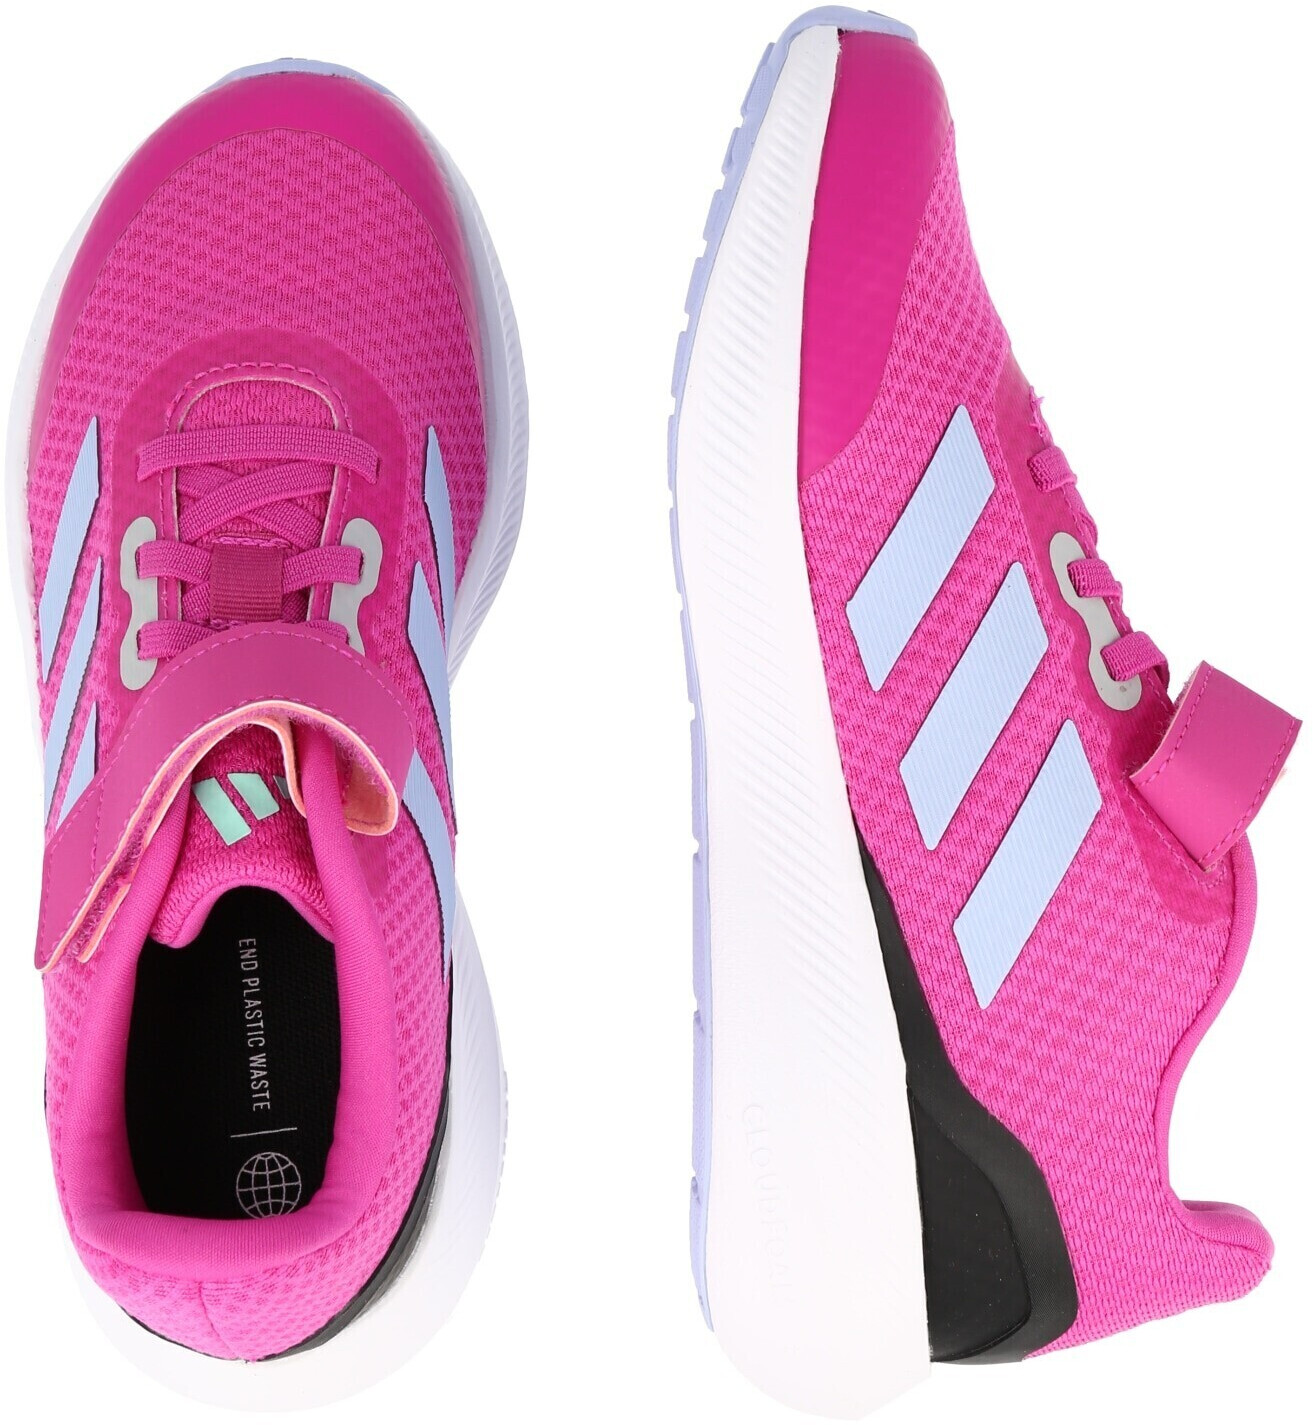 Best Strap £15.50 Elastic (Today) Black Lucid Buy – from on Dawn/Core Lace 3.0 Top Runfalcon Kids Deals Adidas Fuchsia/Blue